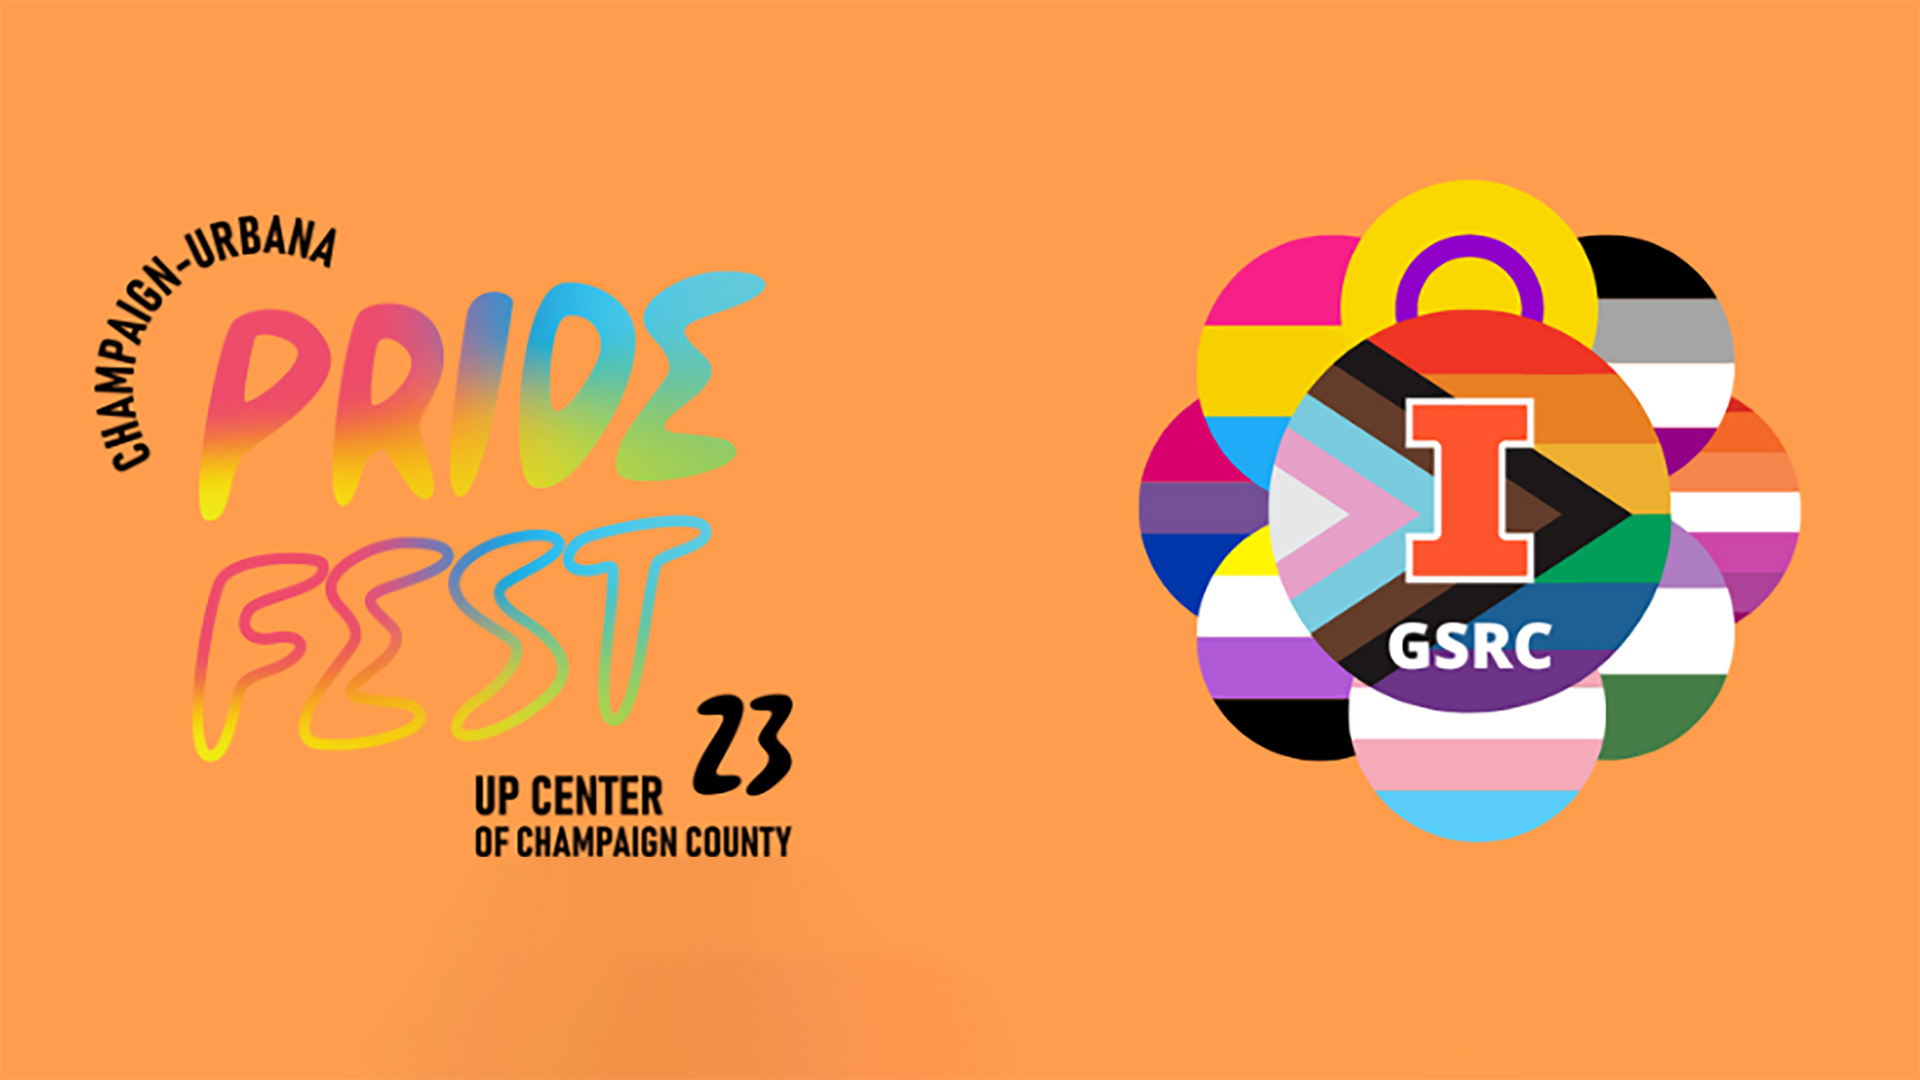 CU Pride Fest logo and UIUC Gender & Sexuality Resource Center logo on an orange background